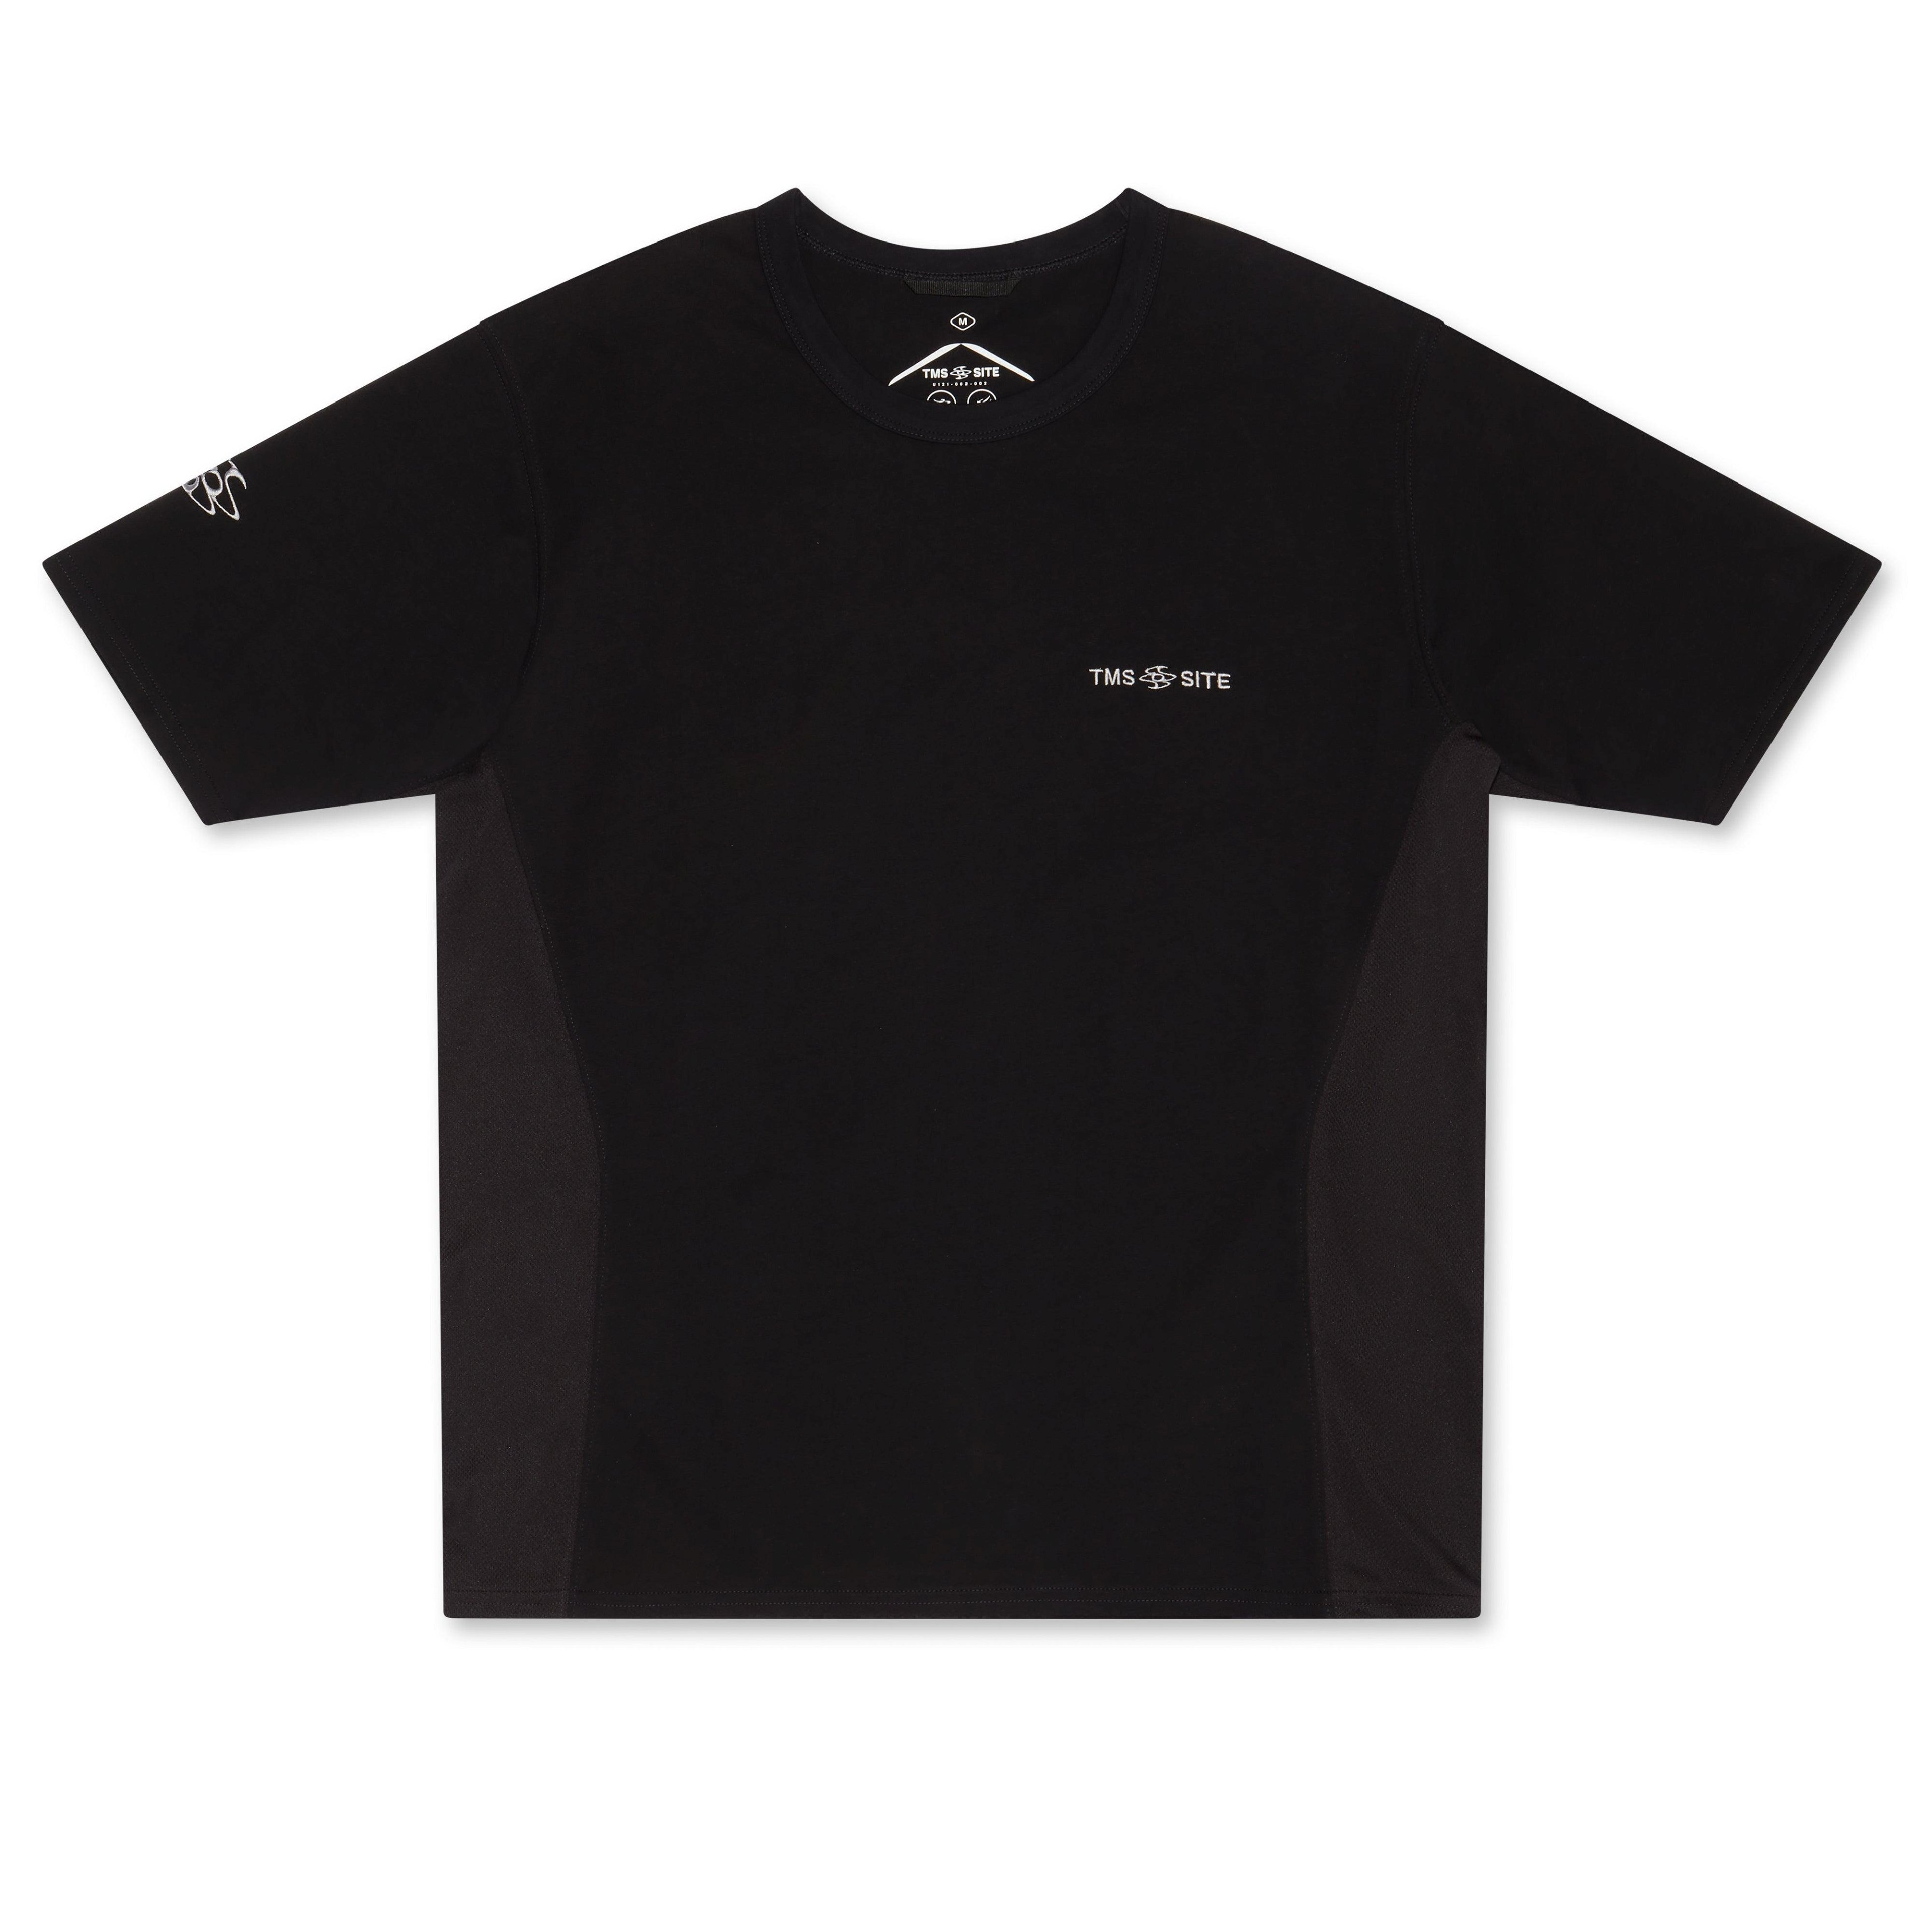 Tms.Site - Men's Tested To Work Staff T-Shirt - (Black) by TMS.SITE